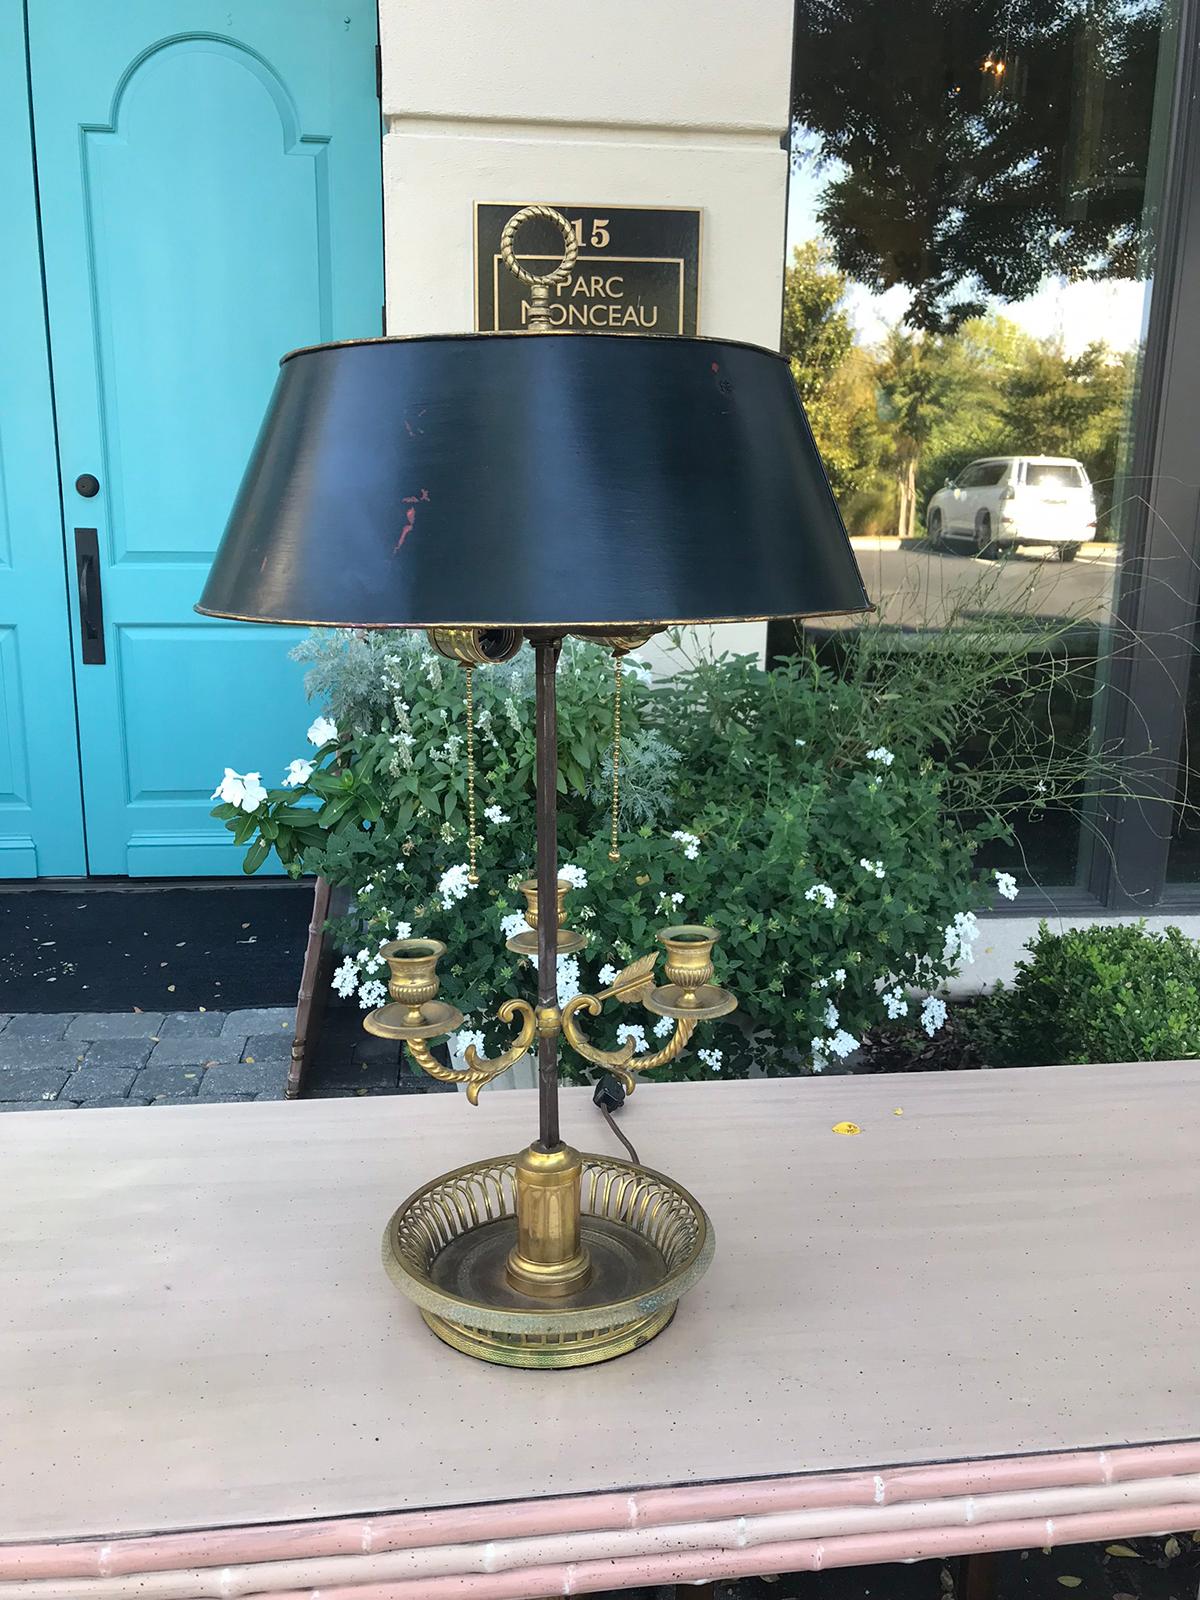 Early 20th century Bouillotte lamp with custom painted shade
Measures: 15